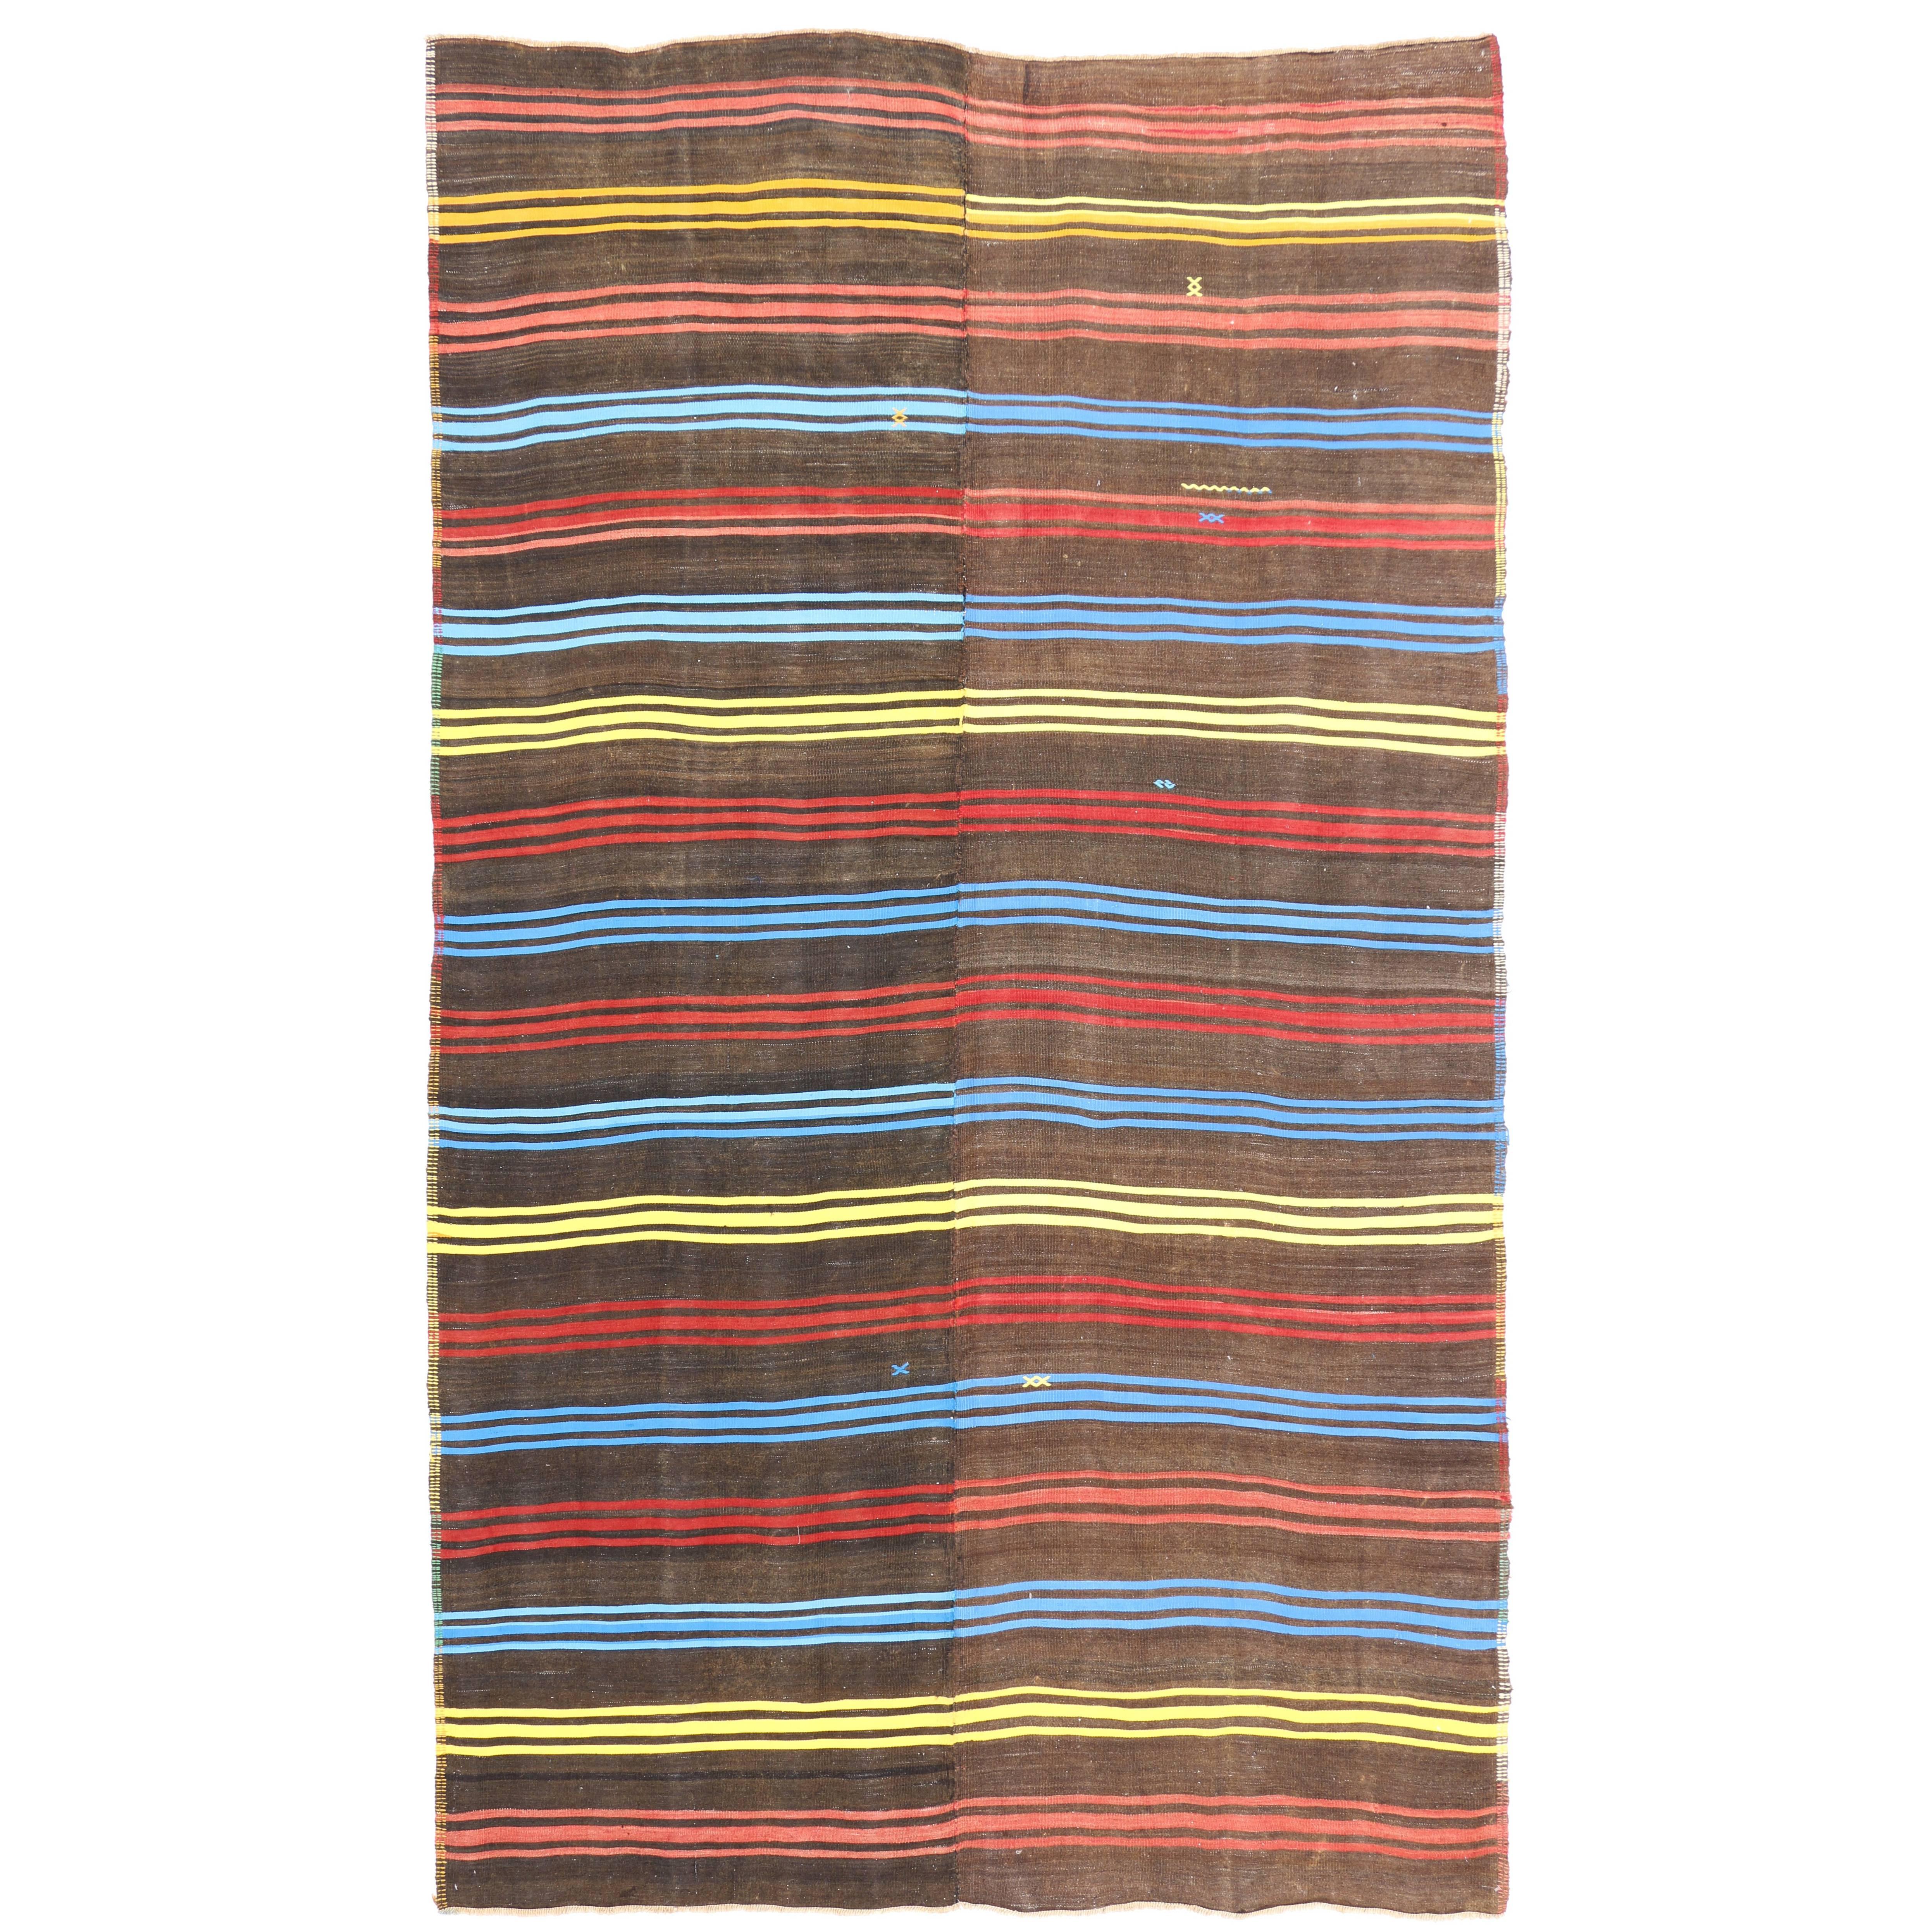 Vintage Turkish Kilim Rug with Colorful Bayadere Stripes with Modern Cabin Style For Sale